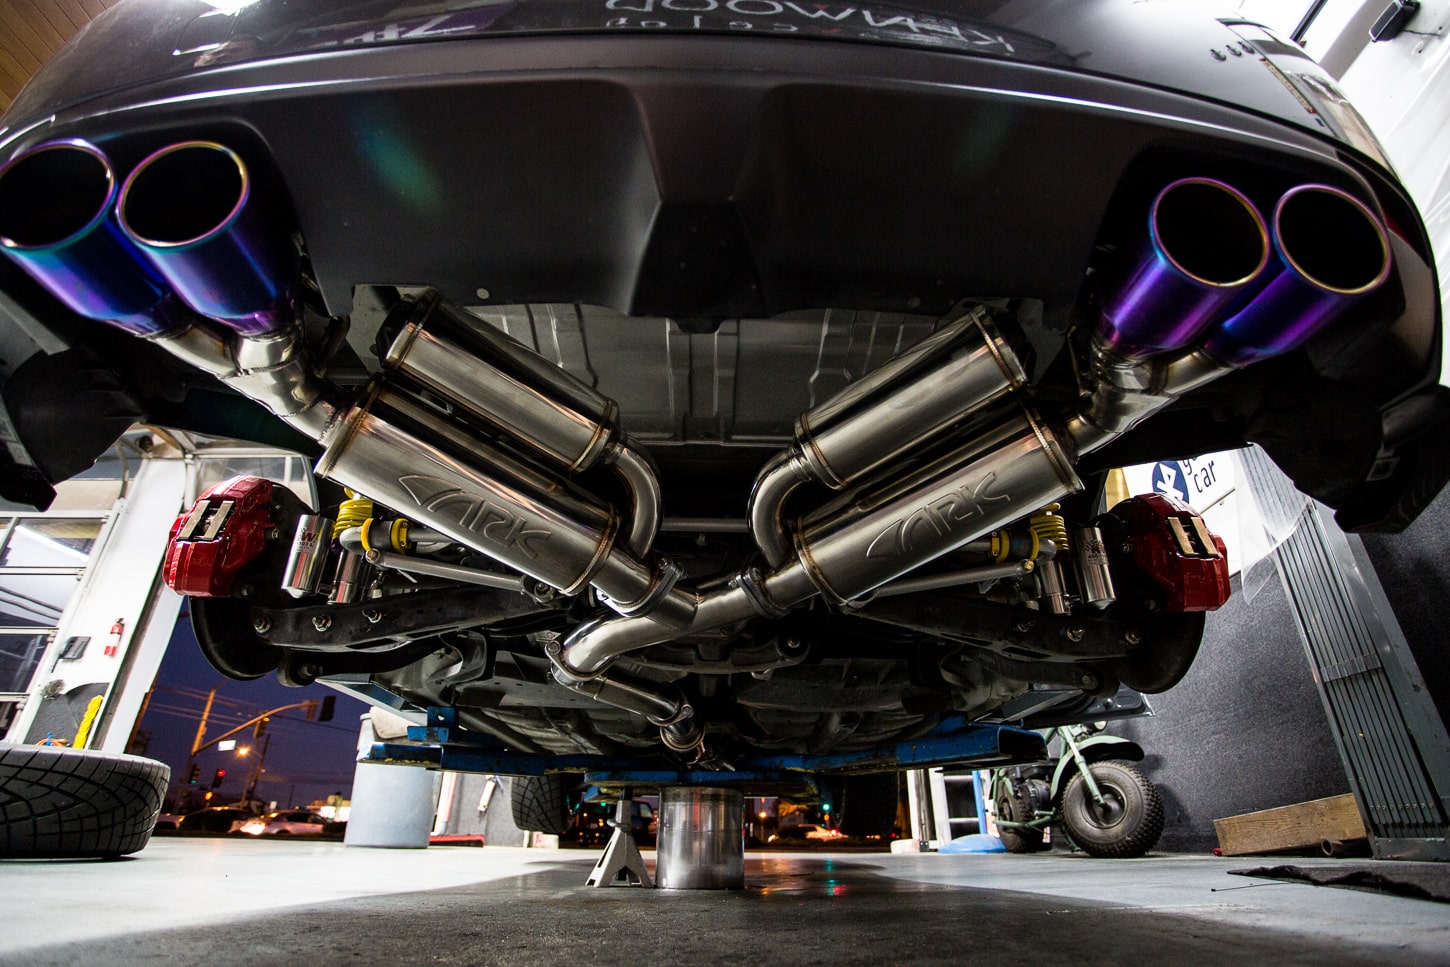 A performance exhaust let the engine expels exhaust better to let air in fa...